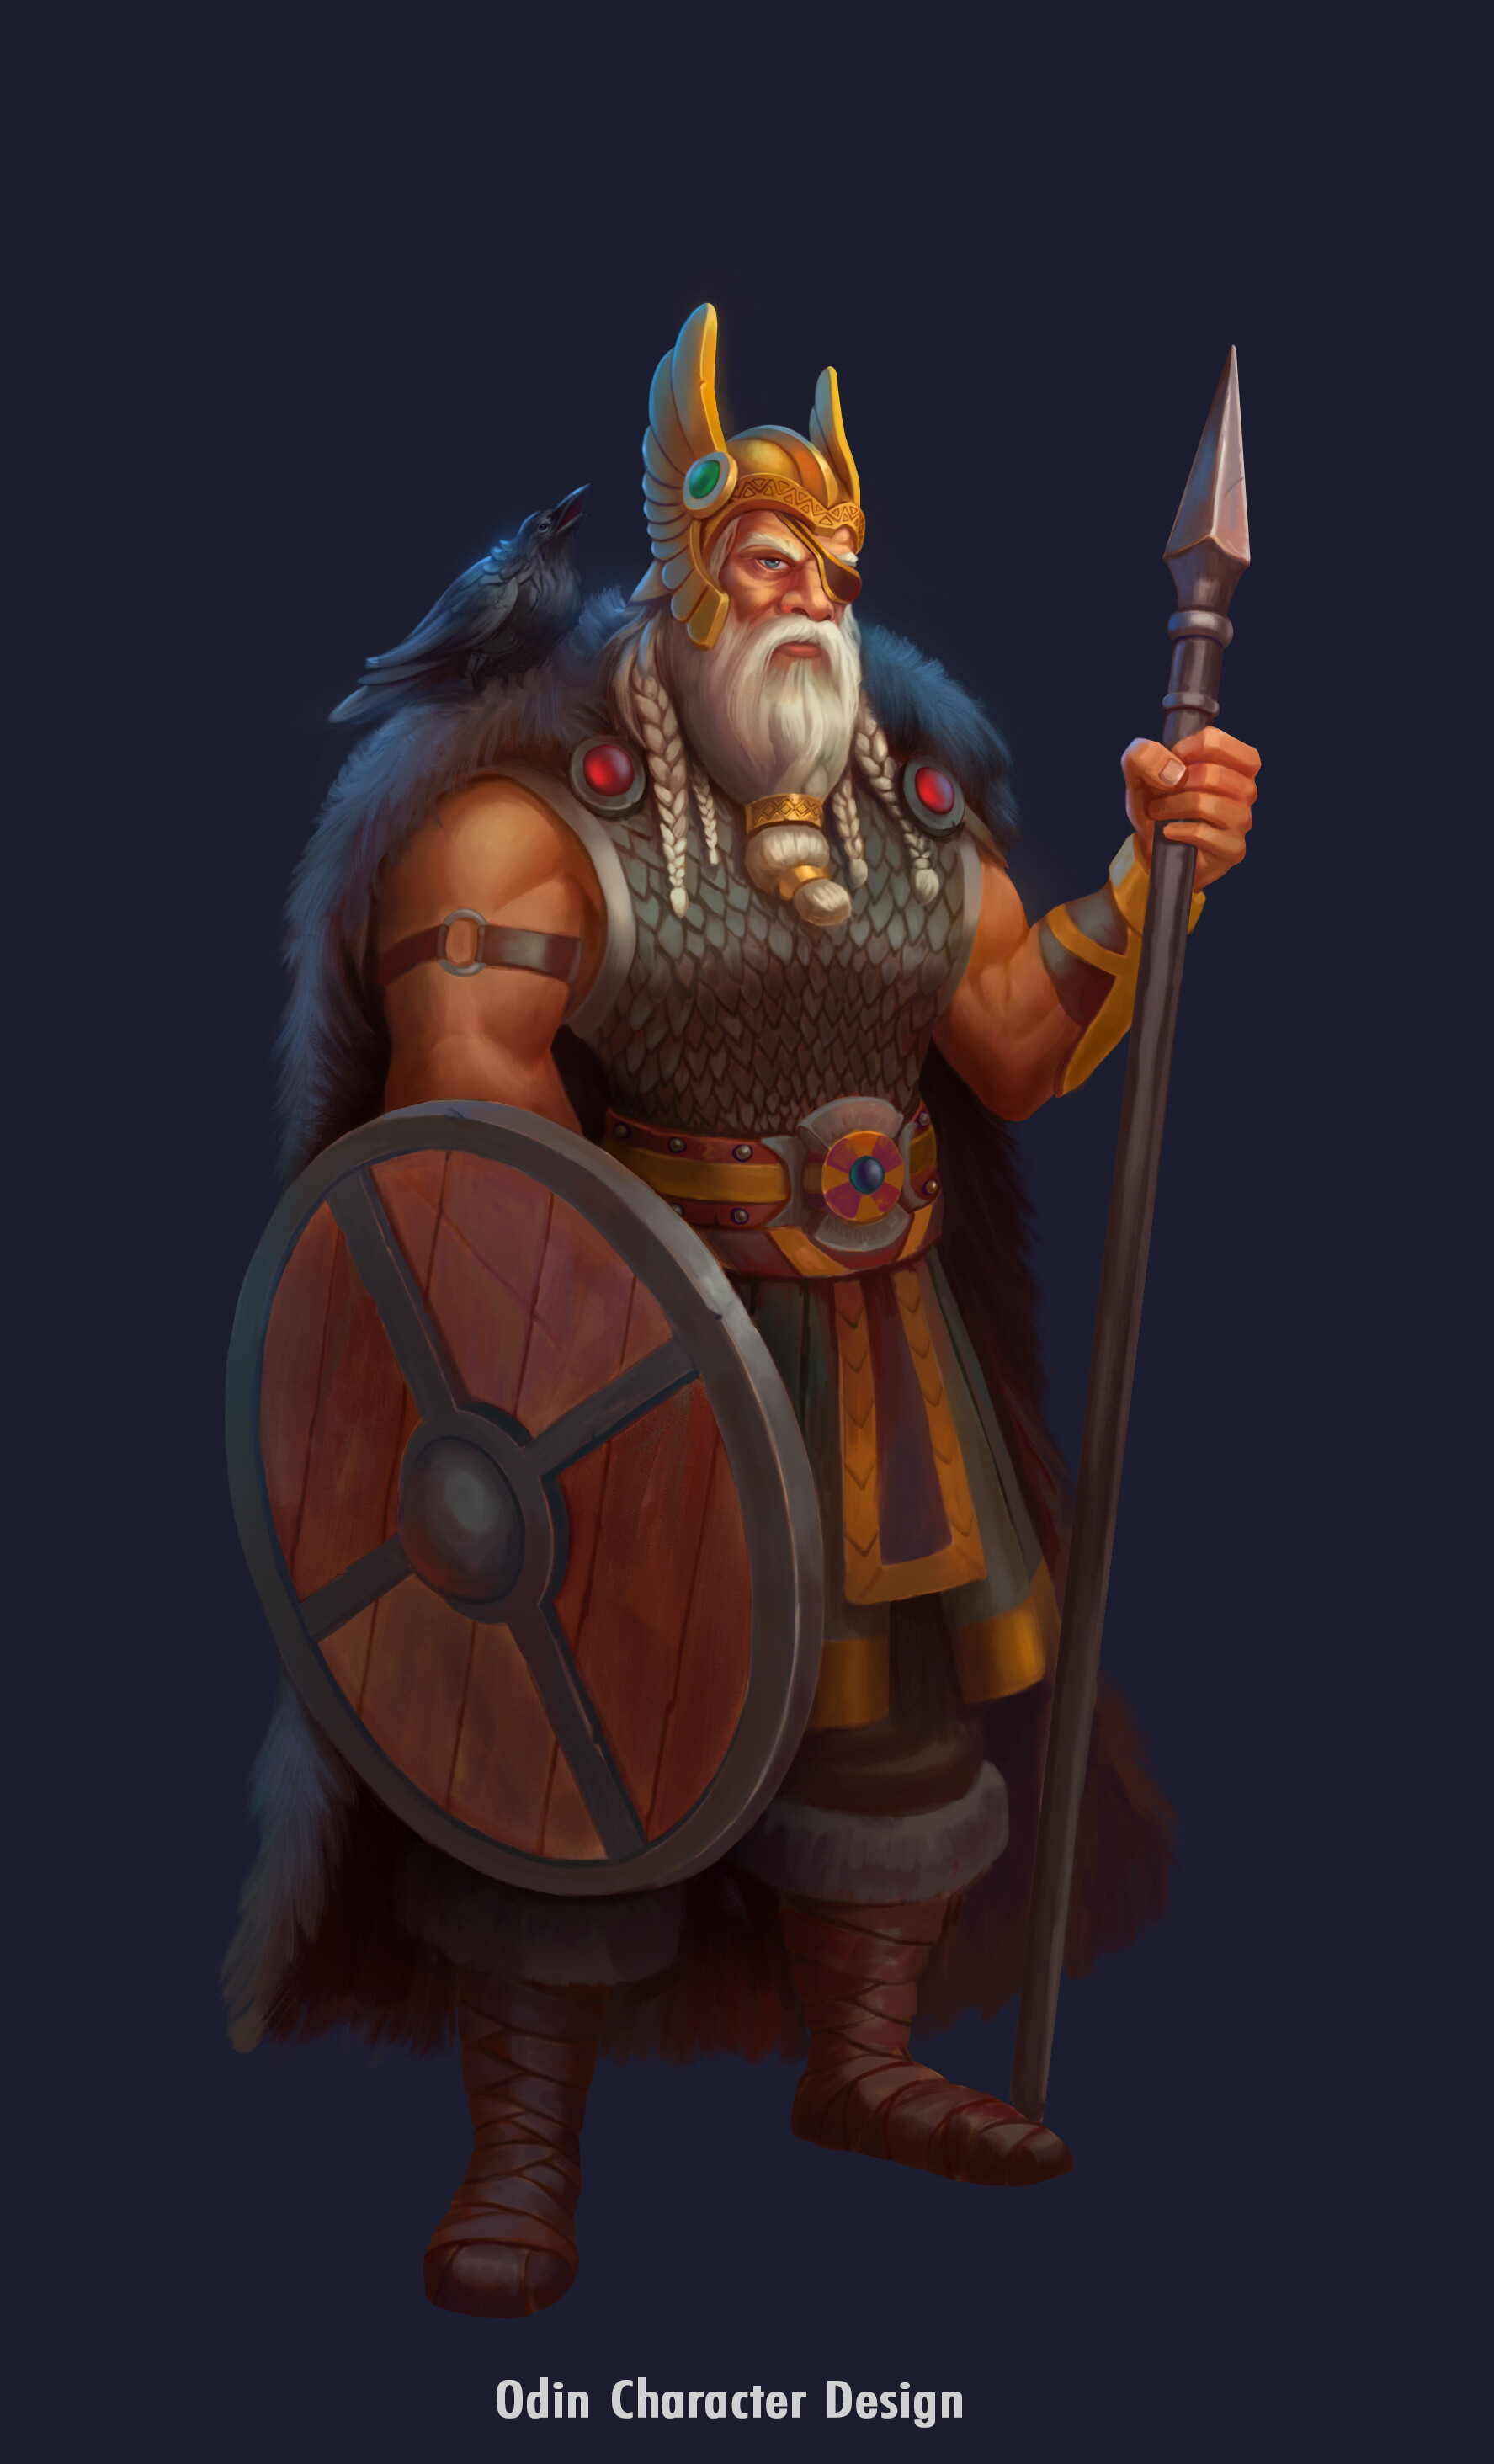 Odin Quest from Playsnail which is a RPG Webgame with the background of  Norse Myth. As a free browser game, oq integra…